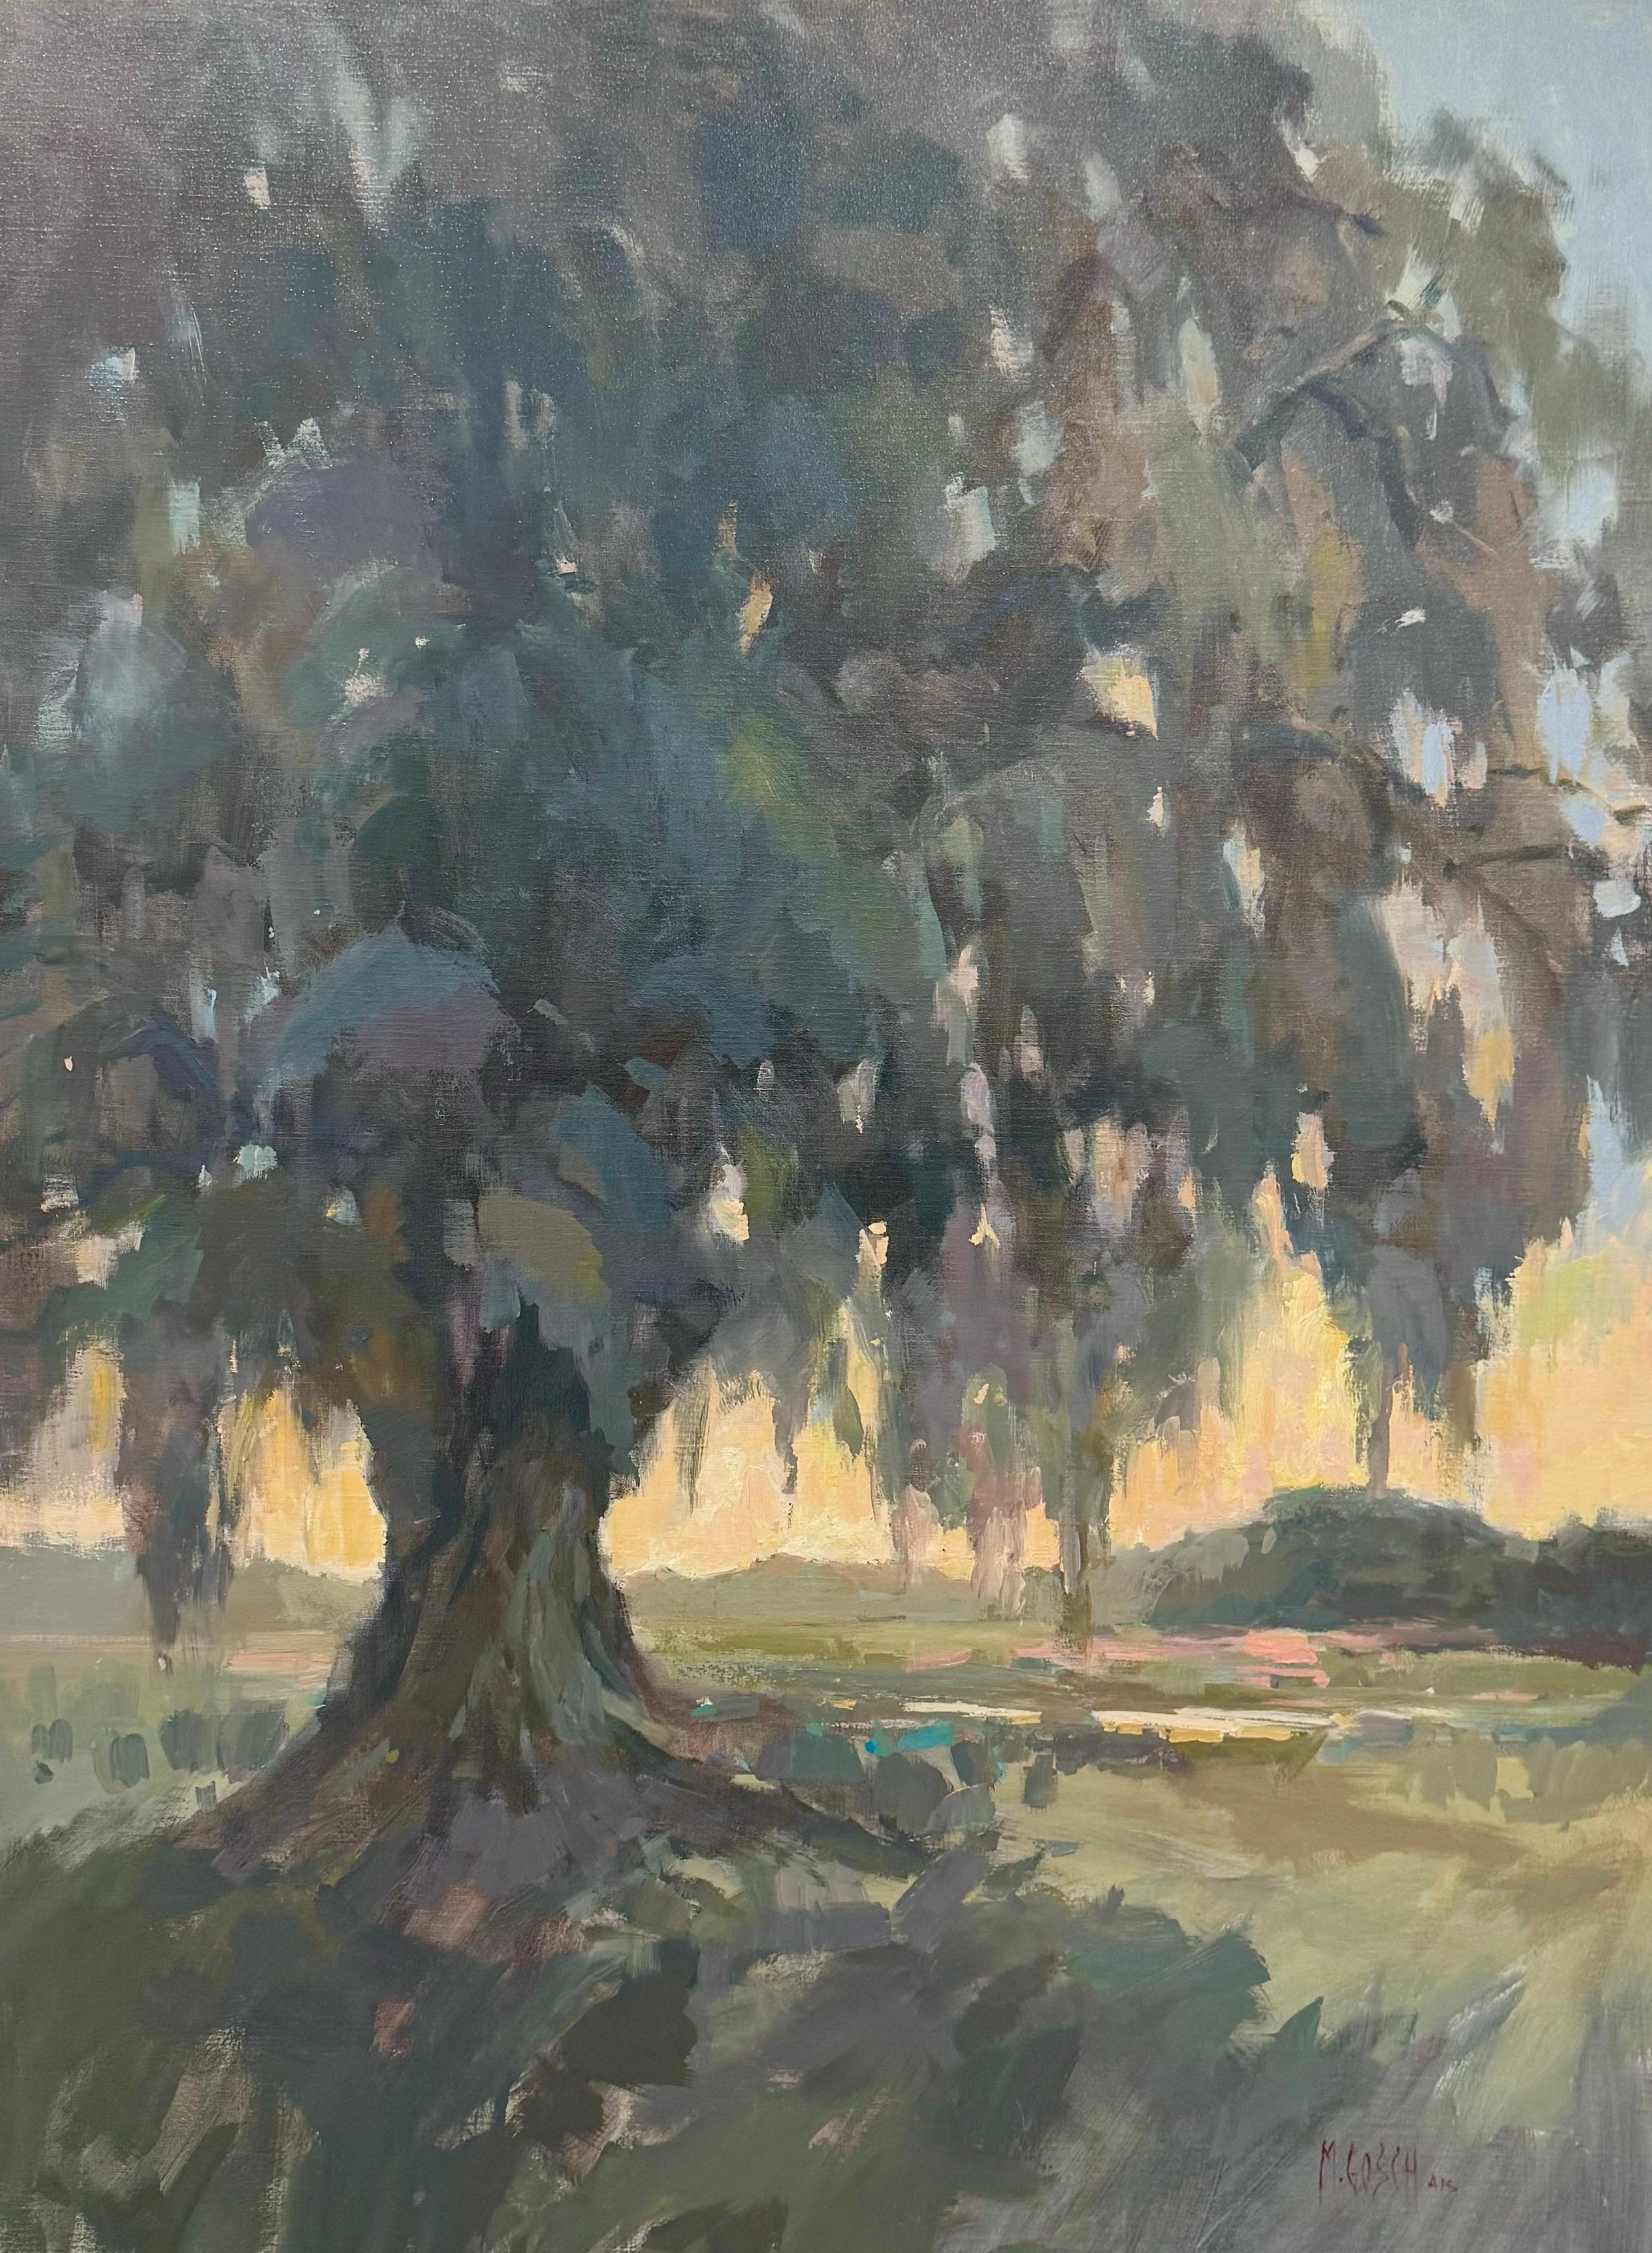 Unframed this piece measures 50"H x 38"W 

Millie Gosch is an avid plein air painter who paints studies from real life and from these studies she creates her beautiful landscape pieces. An experienced artist, she has worked for over 25 years as a